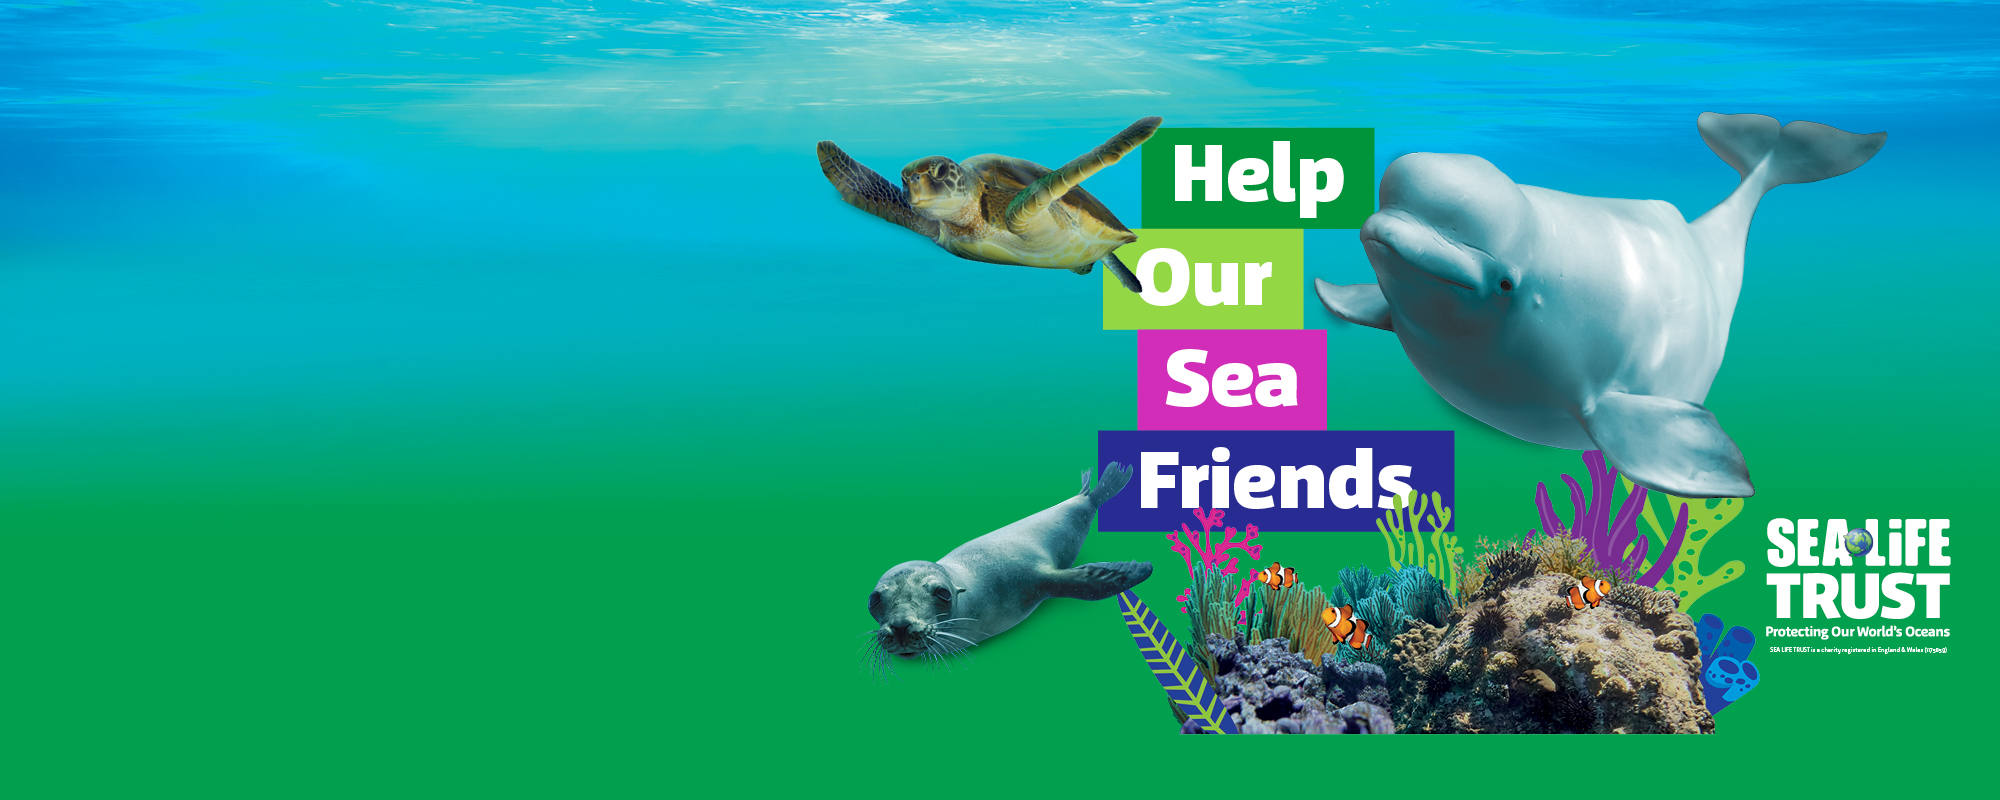 An Image with a blue to green gradient with a seal, turtle and beluga whale surrounding text that says Help Our Sea Friends